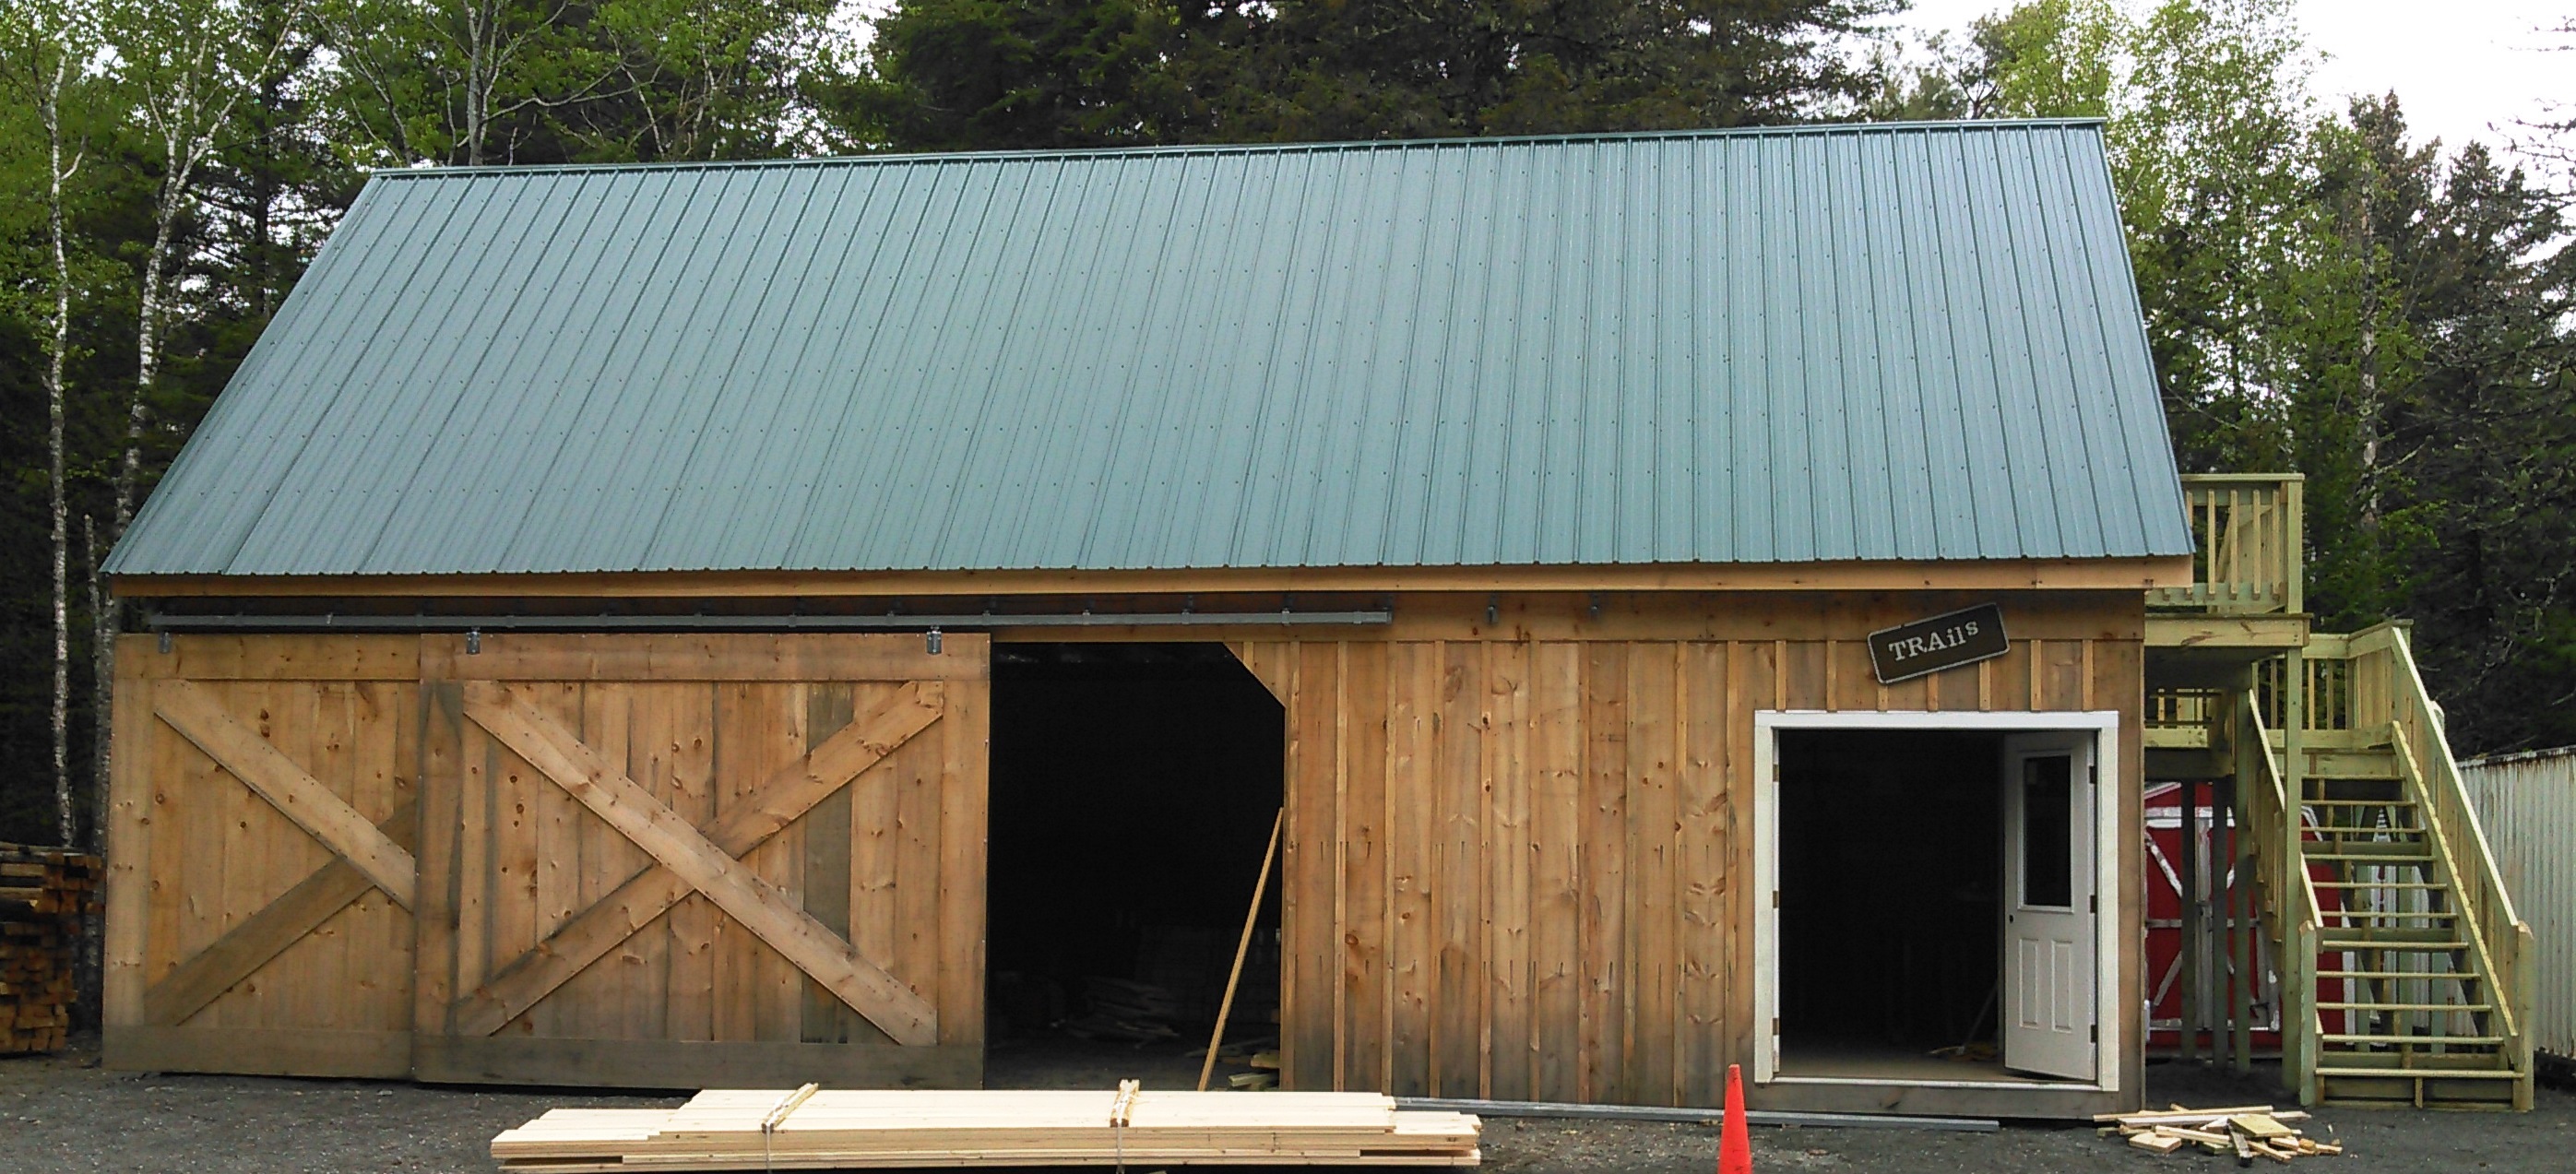 A pine wood, two story shed with barn doors open to the left and regular doors open to the right stands facing the viewer. A green metal roof covers the structure, while small amounts of cloudy sky can be seen surrounding the structure.